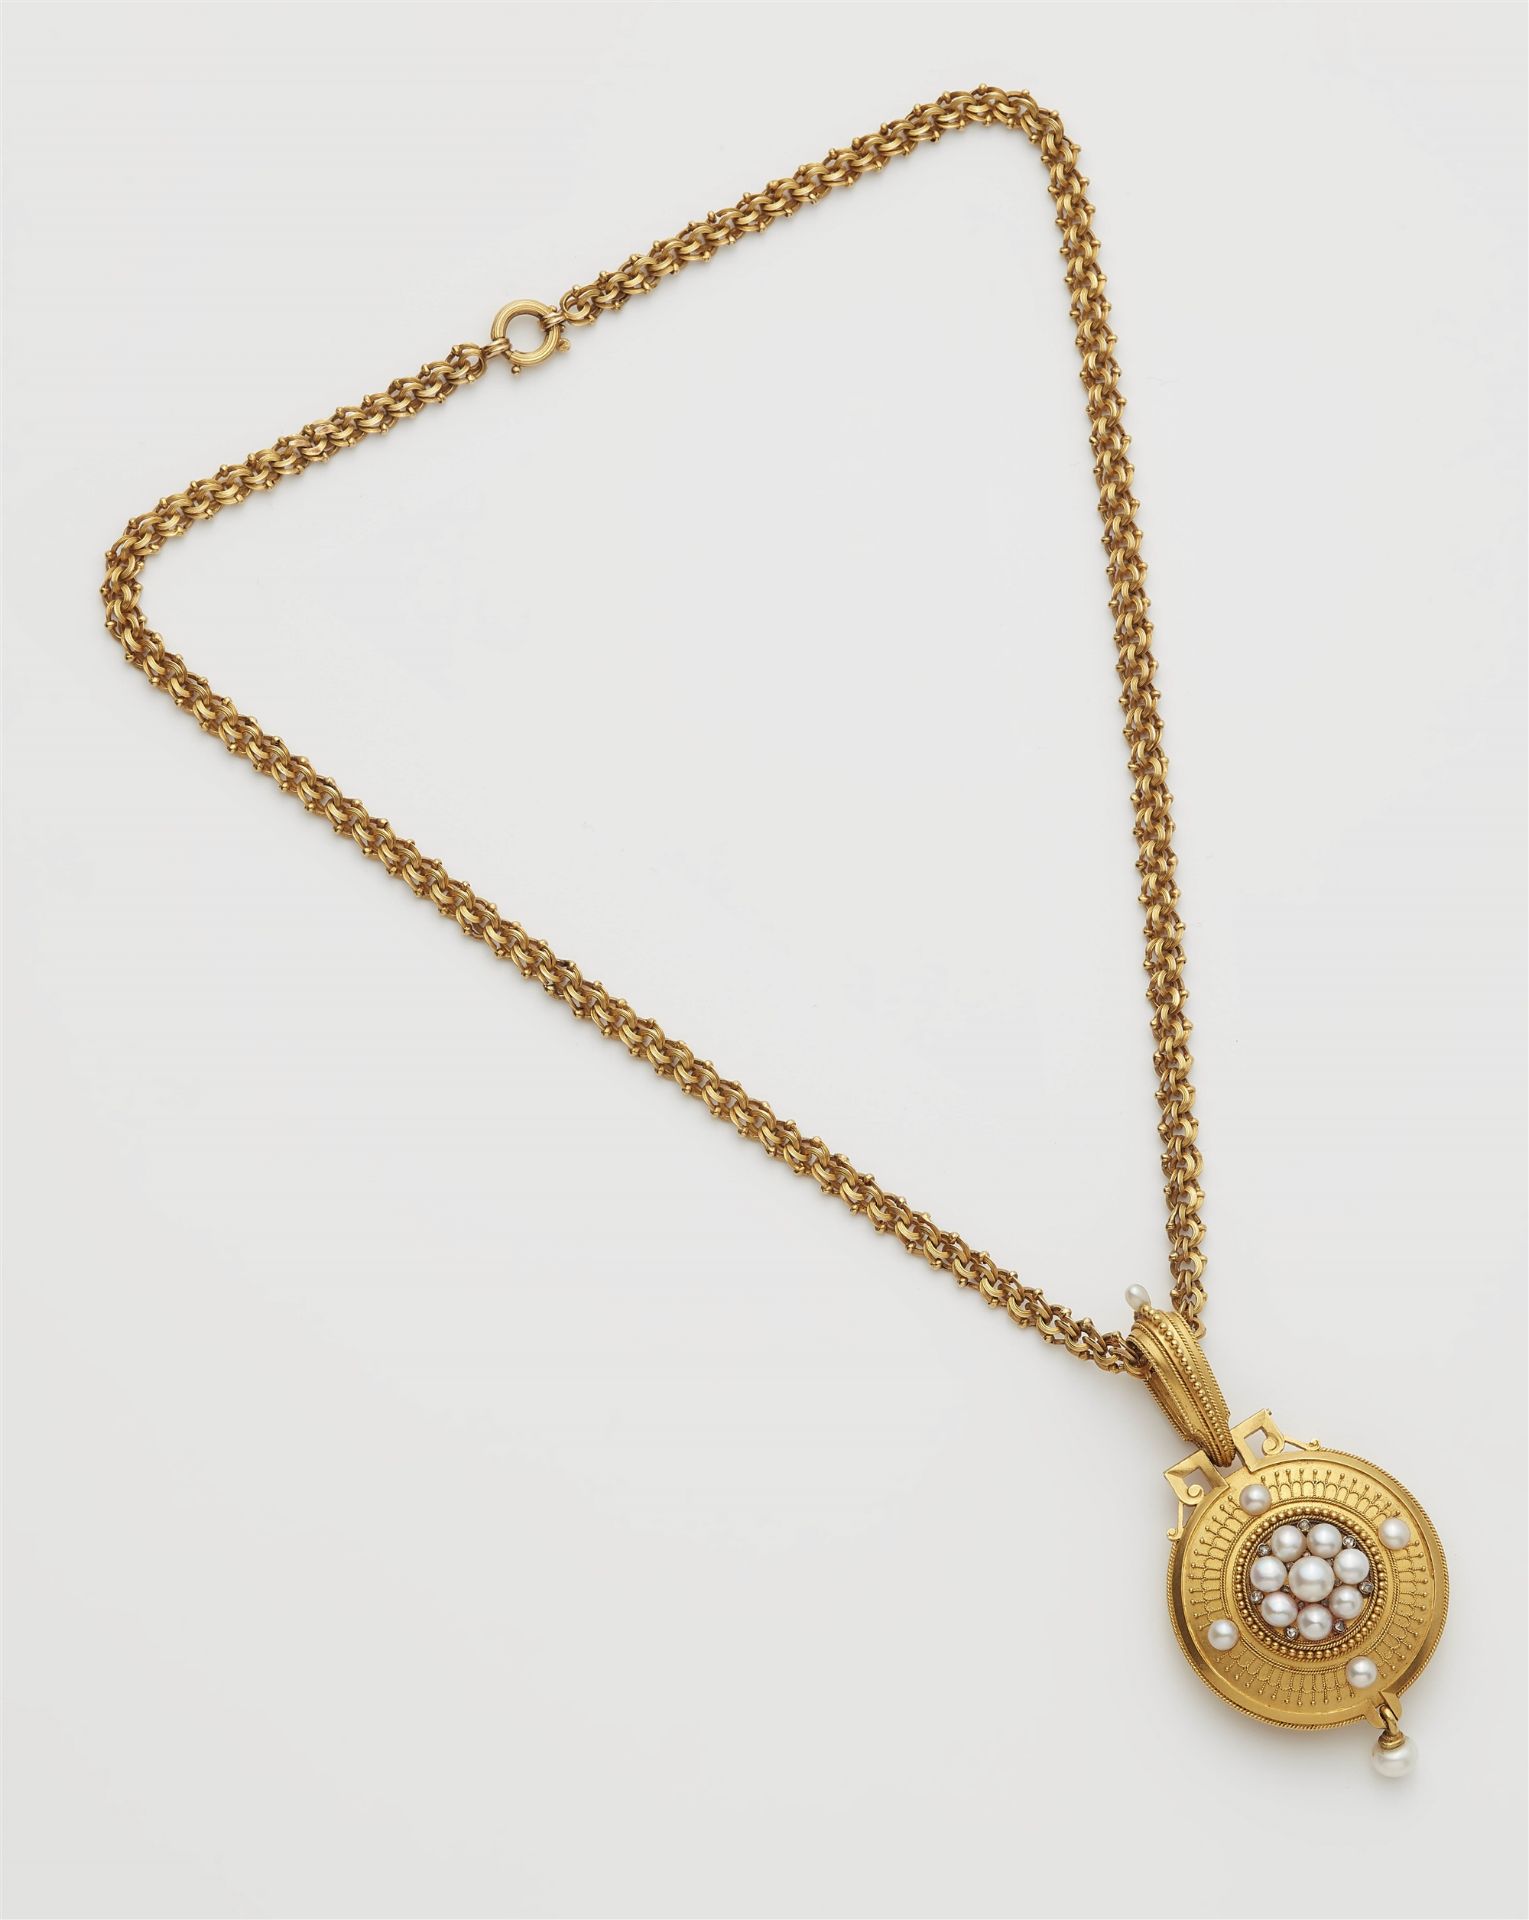 An Archeological Revival 18k gold granulation pearl and diamond locket with chain necklace.